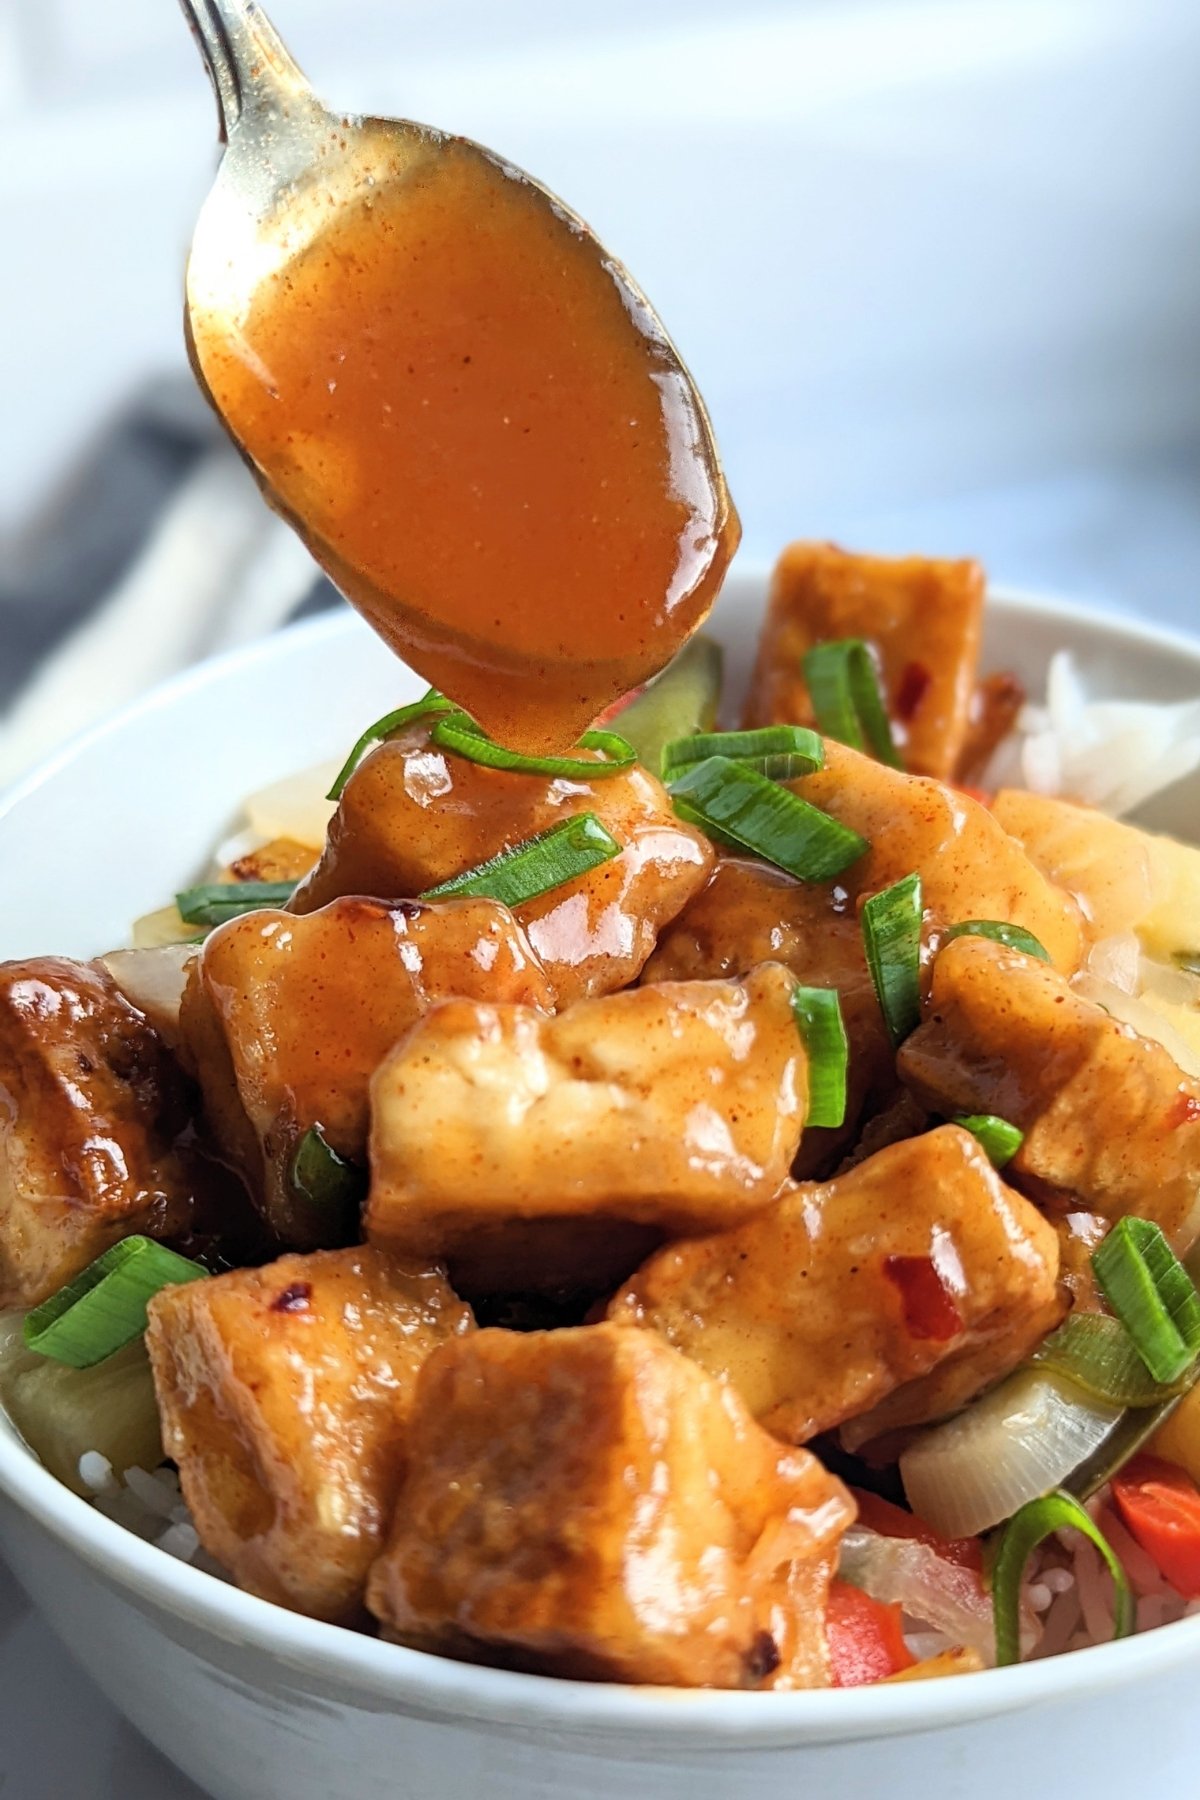 low sodium hot and sour sauce without salt easy no salt asian sauce for stir fry vegetables chicken or rice